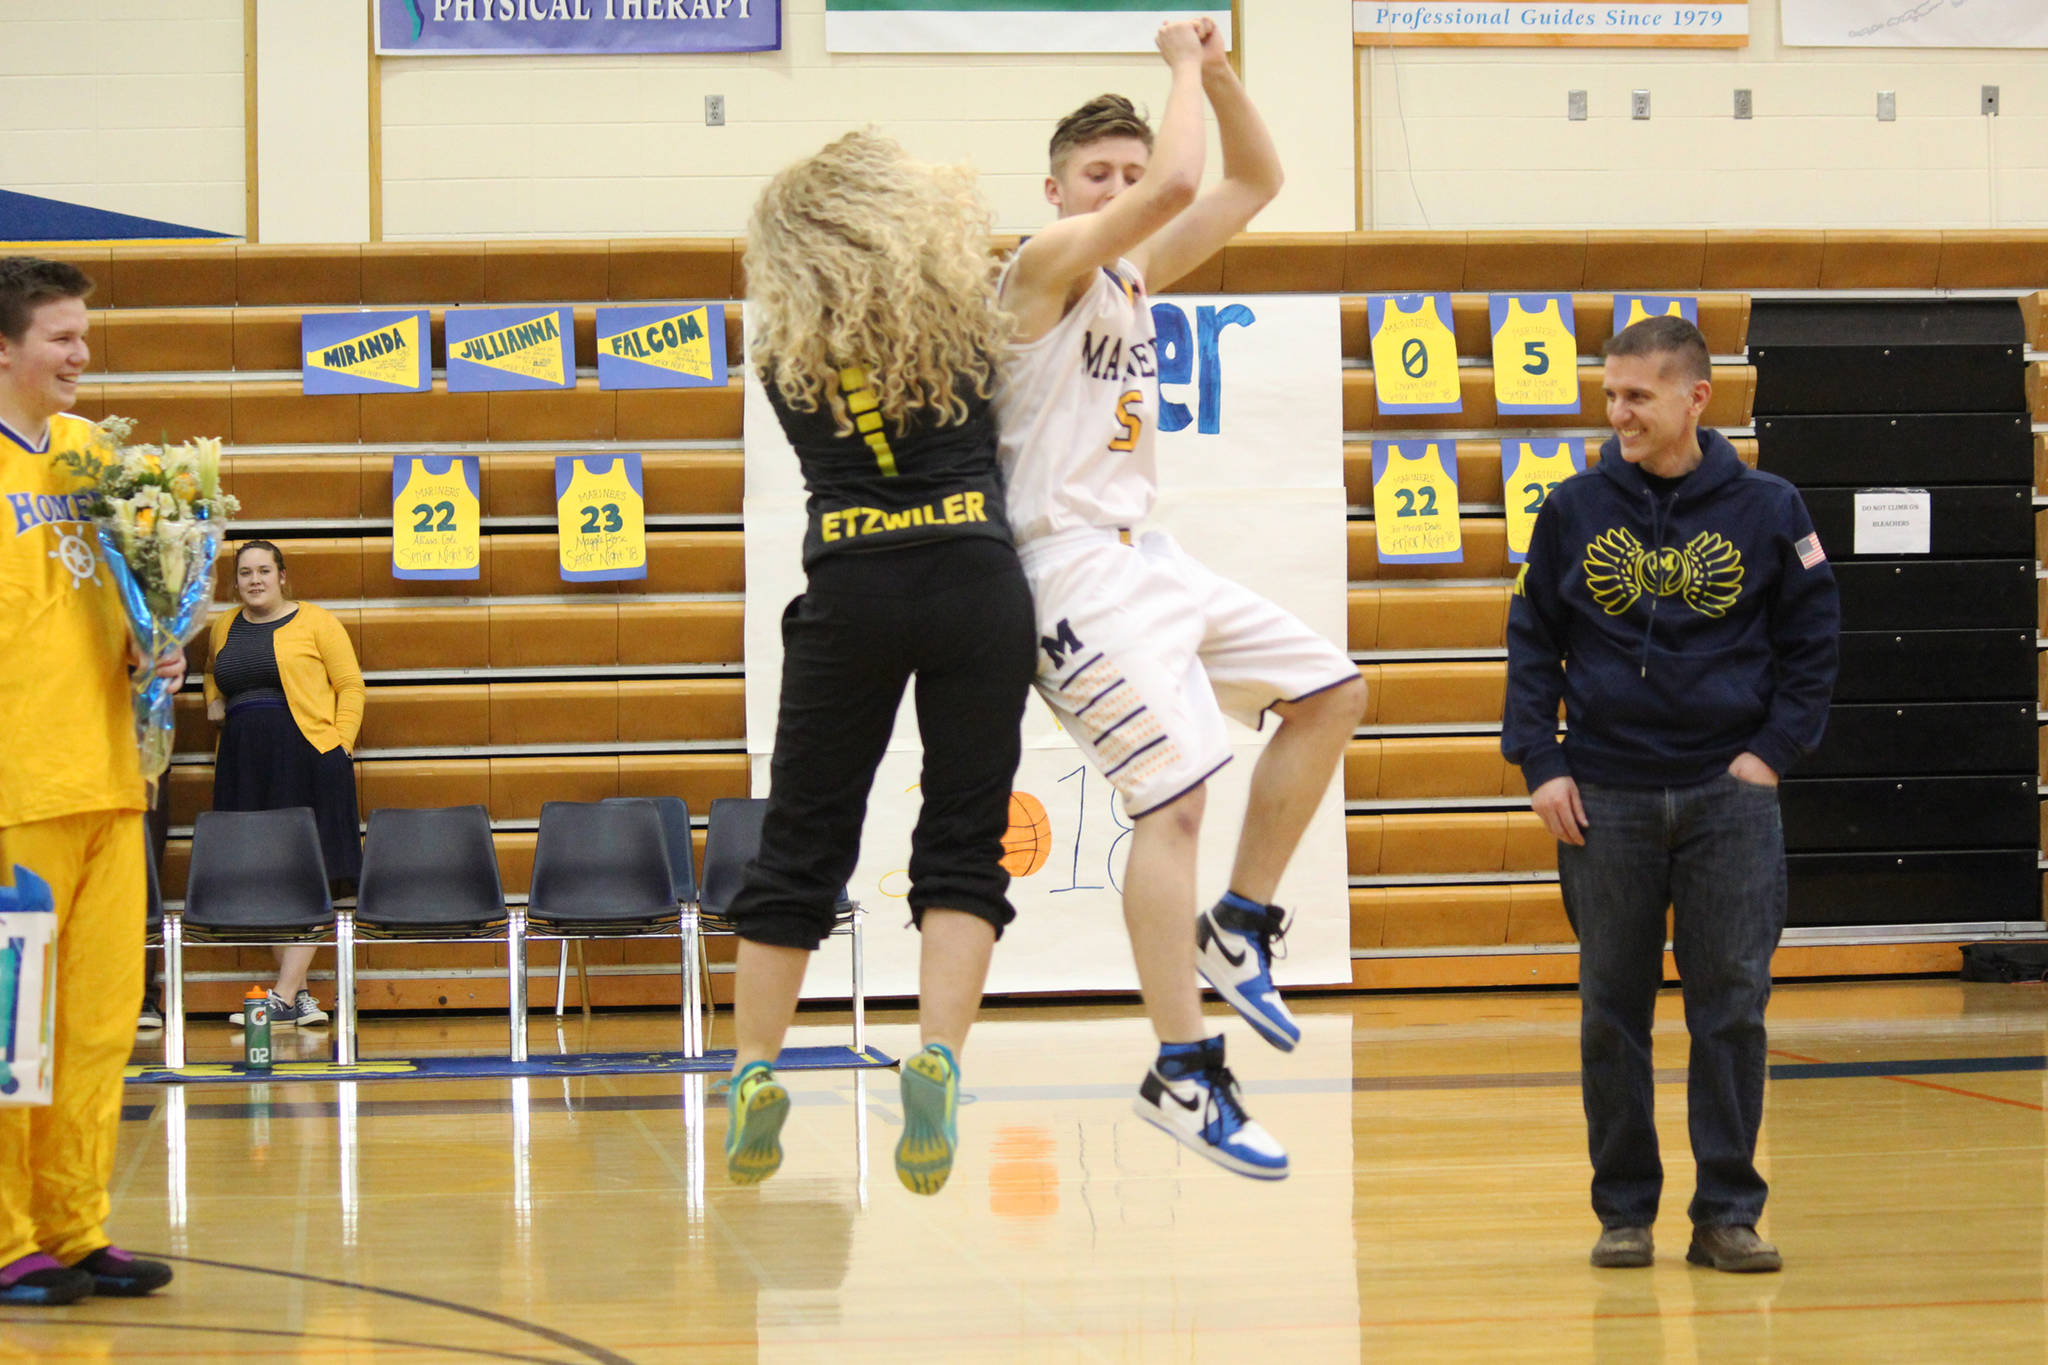 Homer senior Koby Etzwiler jumps into the air with his mother, Krista, in a short a mother-son routine during a Senior Night celebration before the basketball team’s game against Seward on Friday, March 2, 2018 in Homer, Alaska. (Photo by Megan Pacer/Homer News)